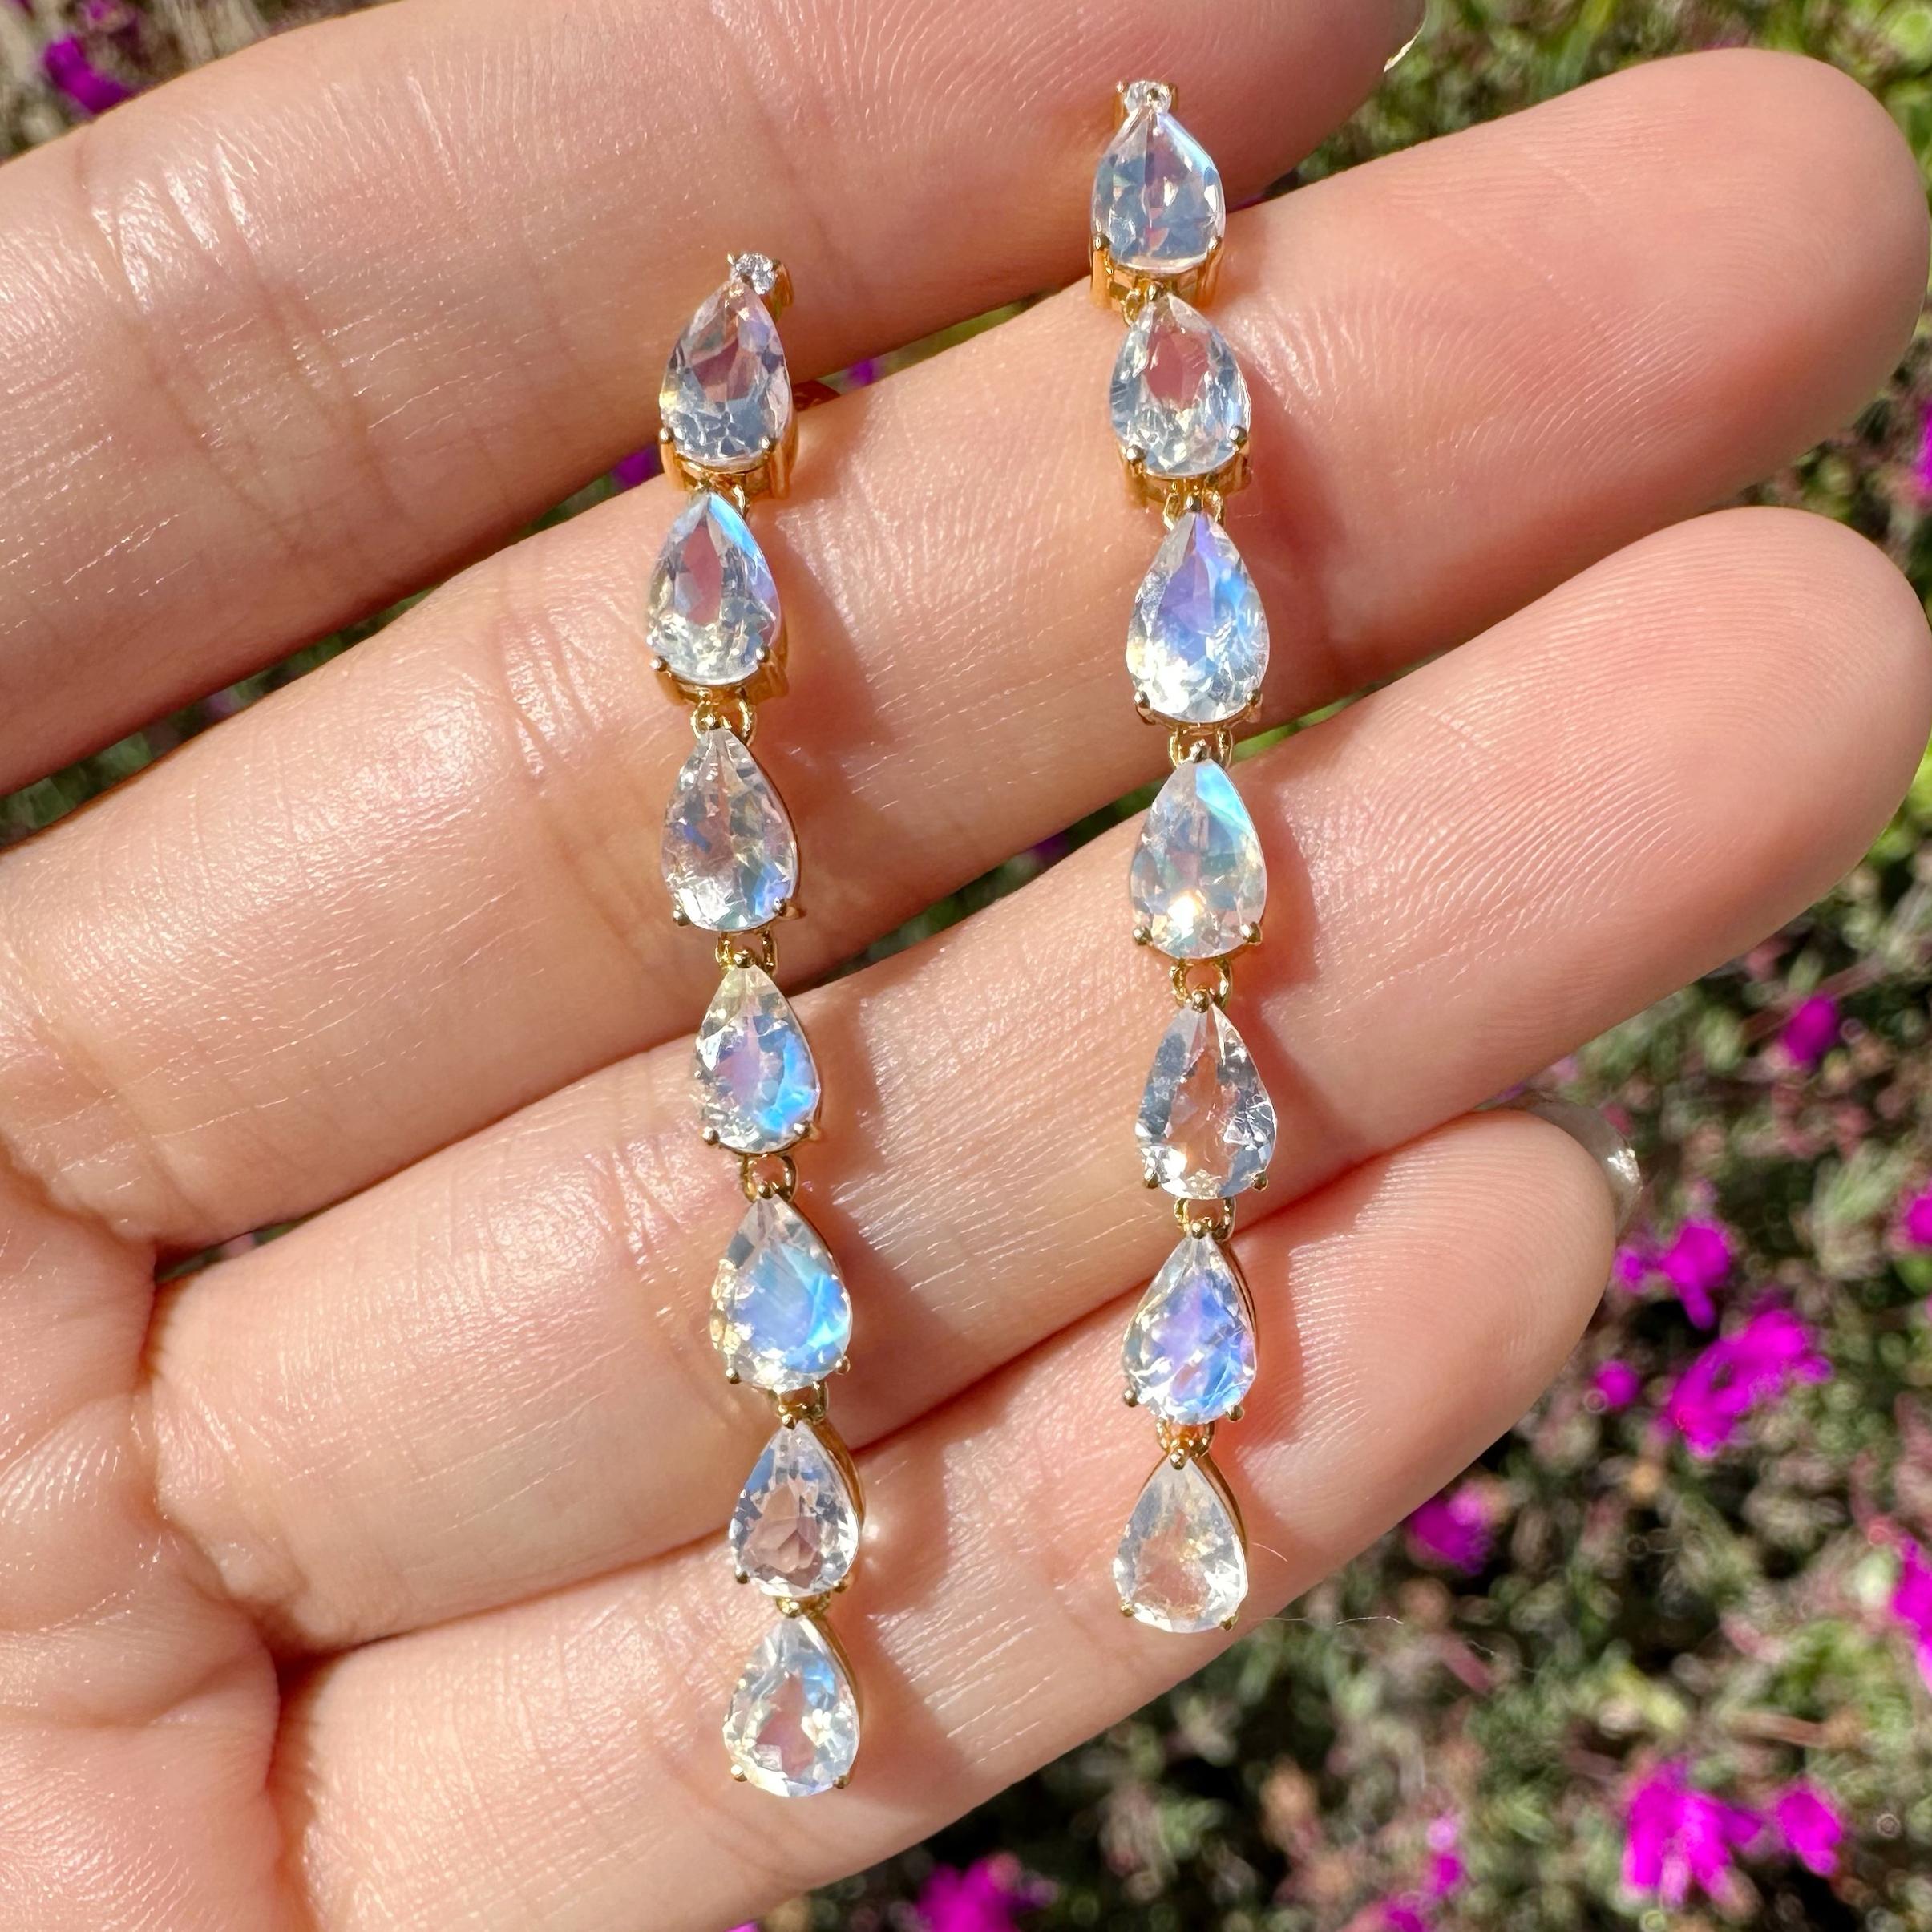 Nina Zhou's Pear Blue Moonstone Diamond Line Drop Earrings in 18k Yellow Gold are a masterpiece of elegance and mystique. Each earring features a mesmerizing pear-shaped blue moonstone, renowned for its captivating luminosity and ethereal blue sheen